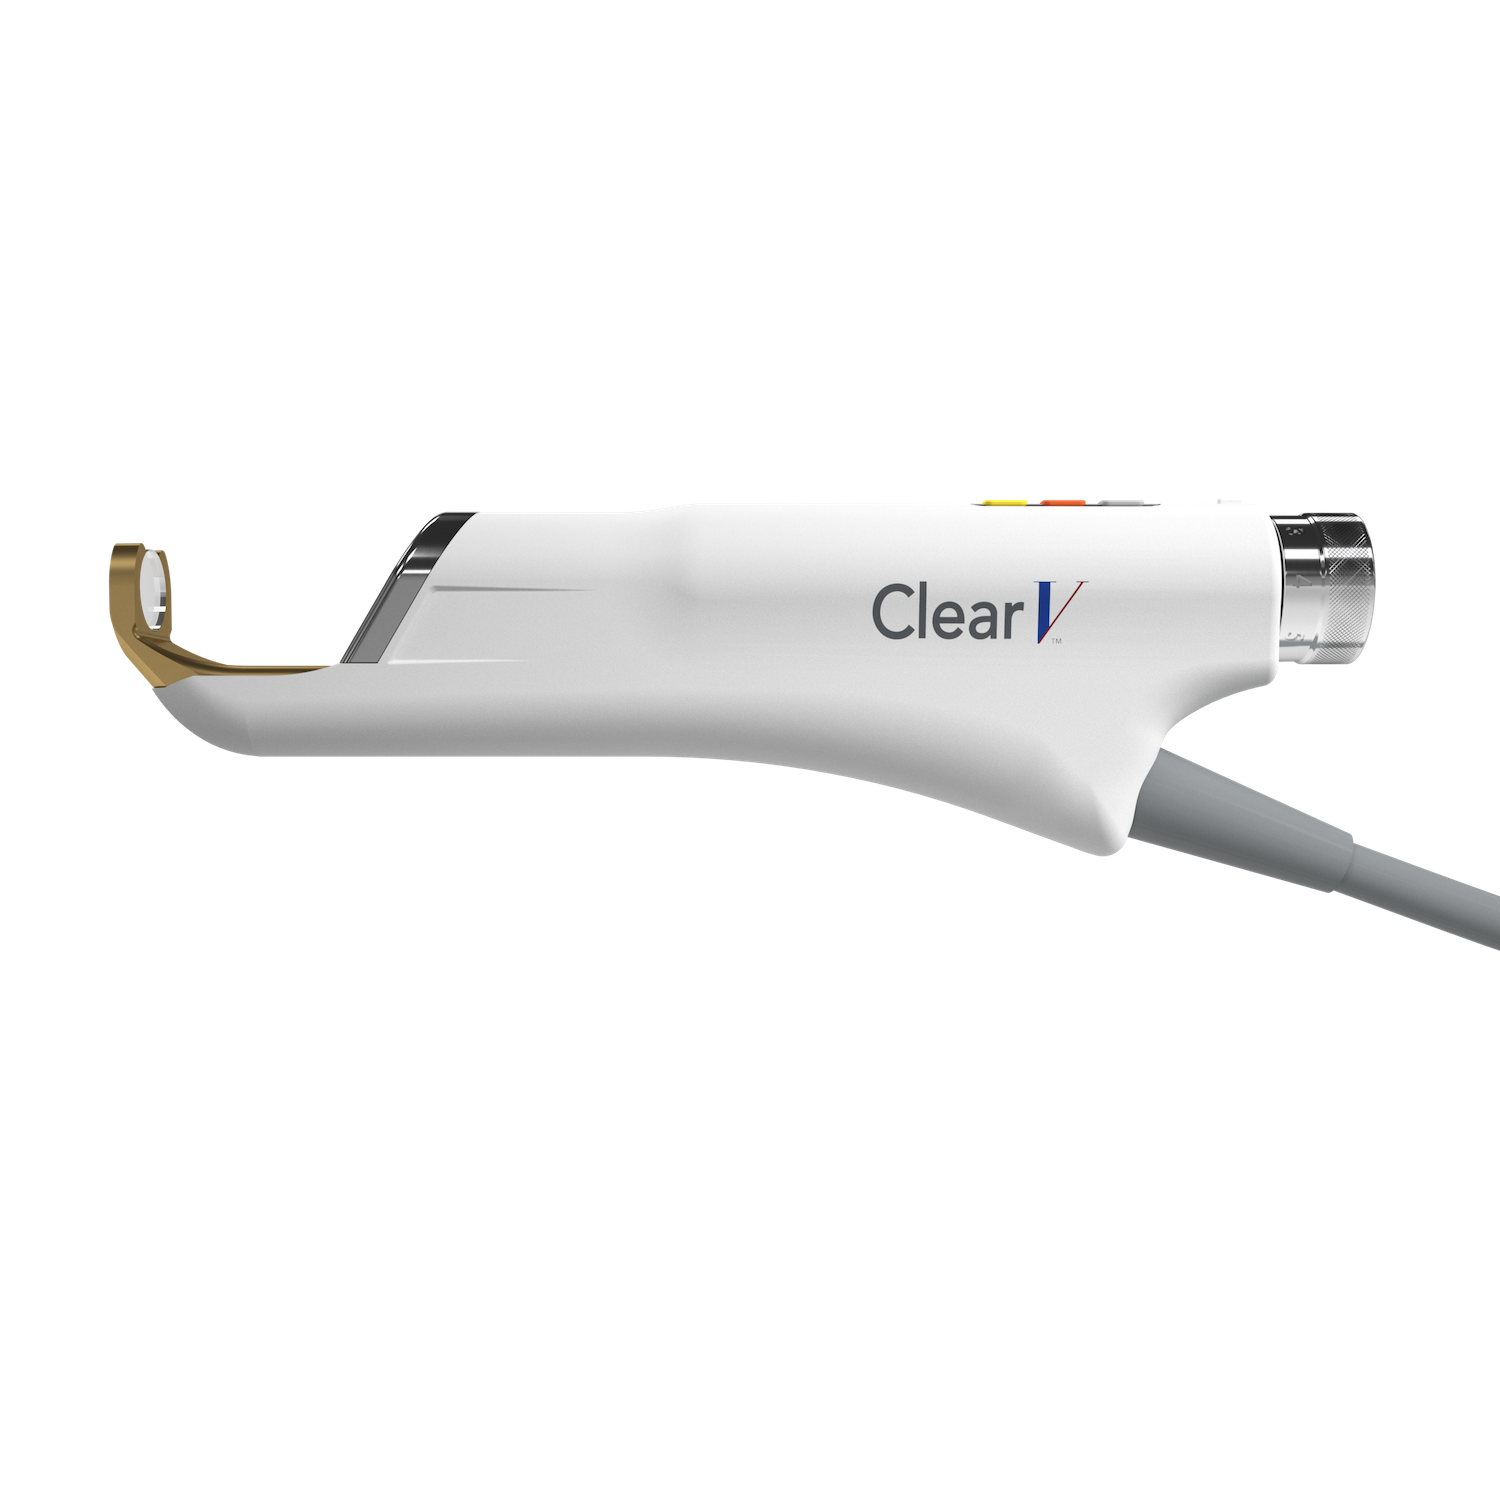 ClearV side view